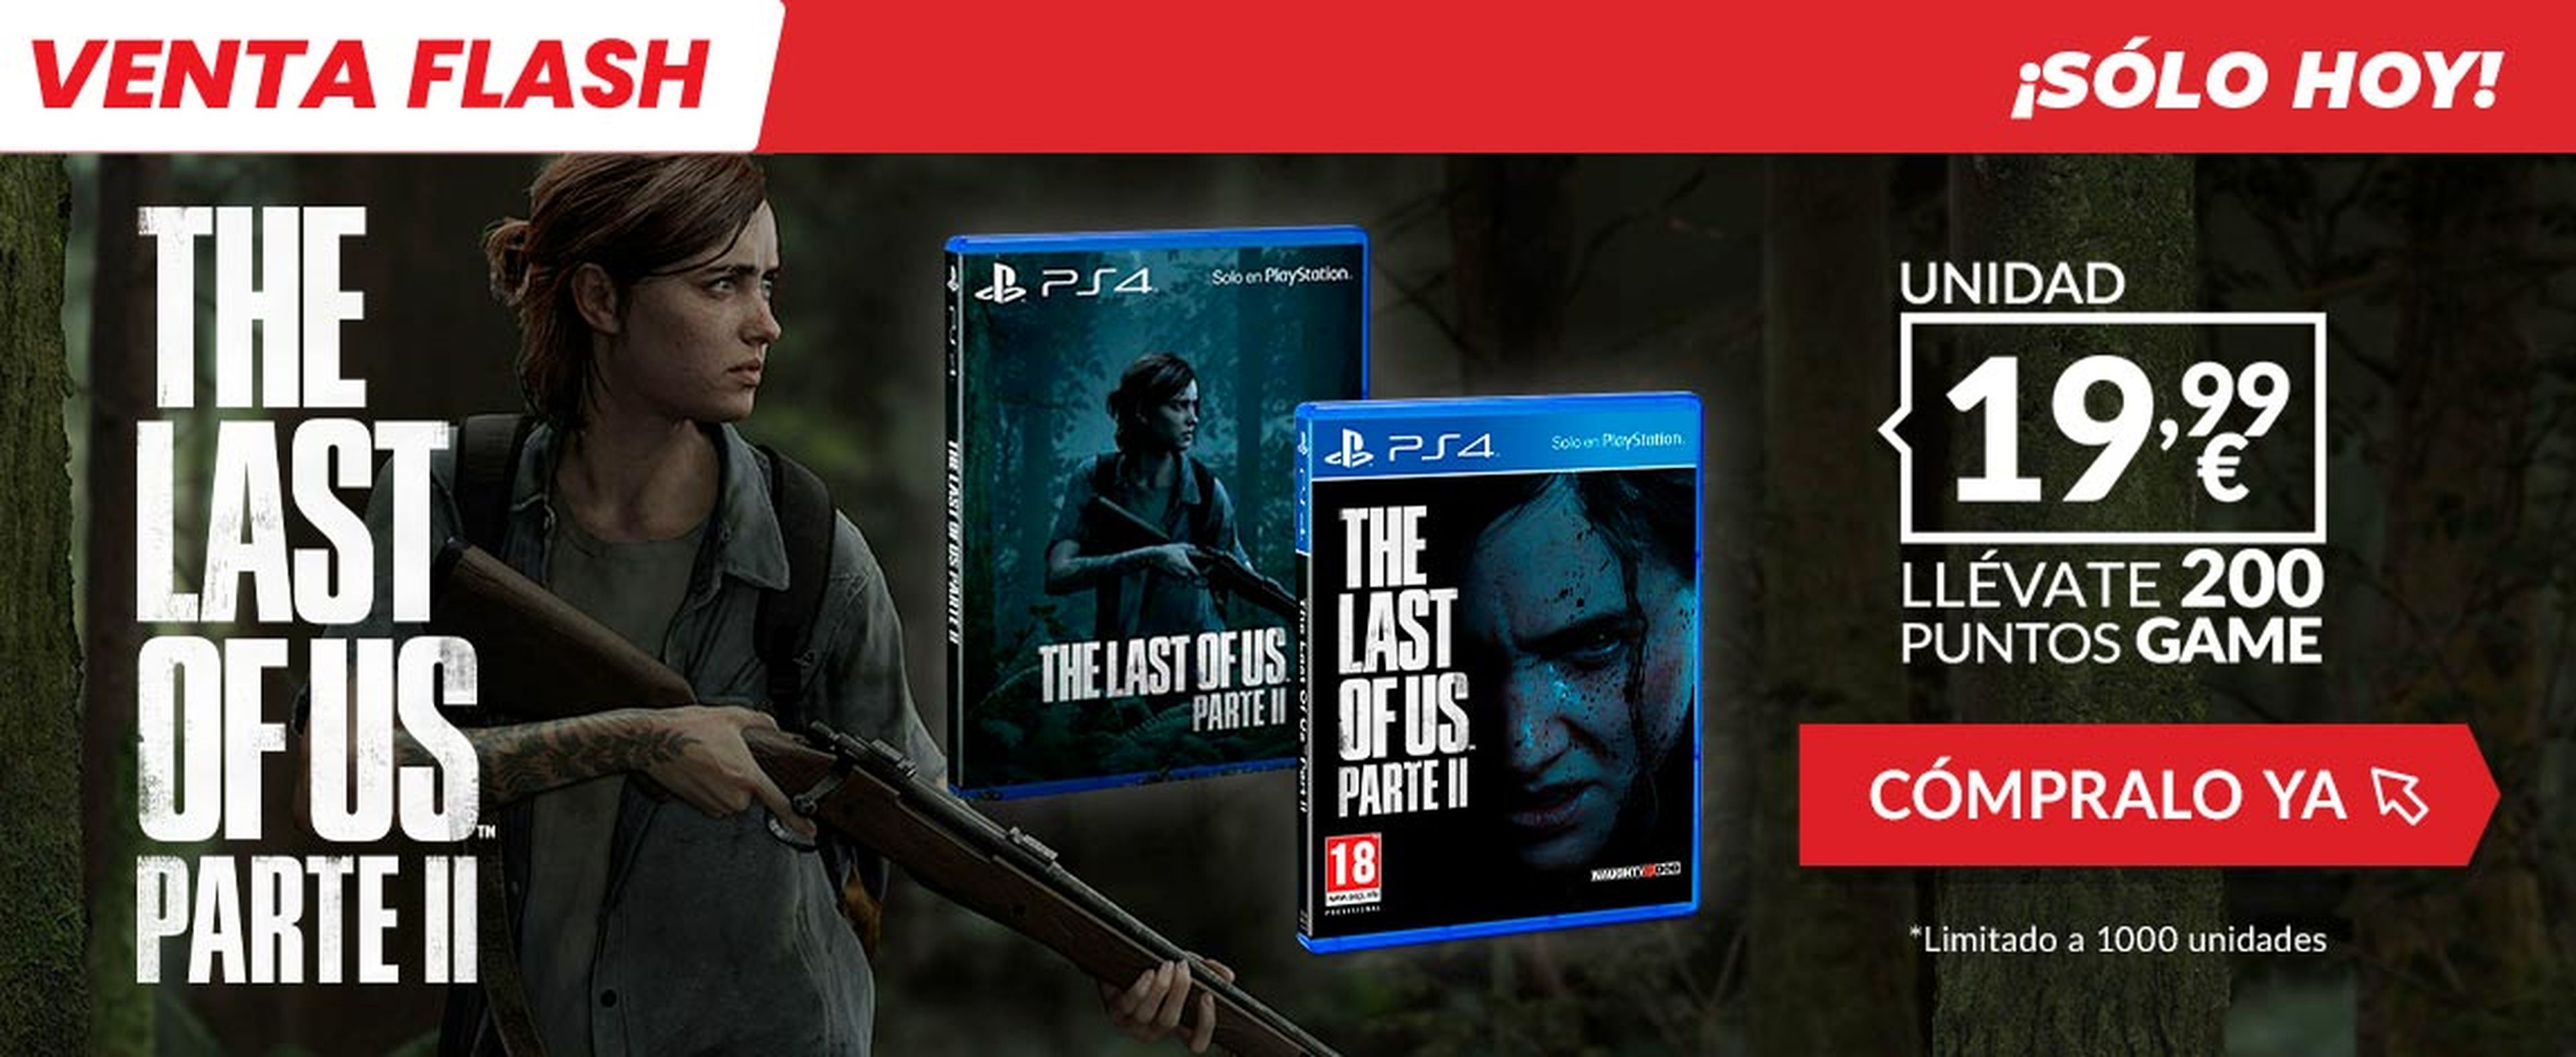 The Last of Us parter 2 game